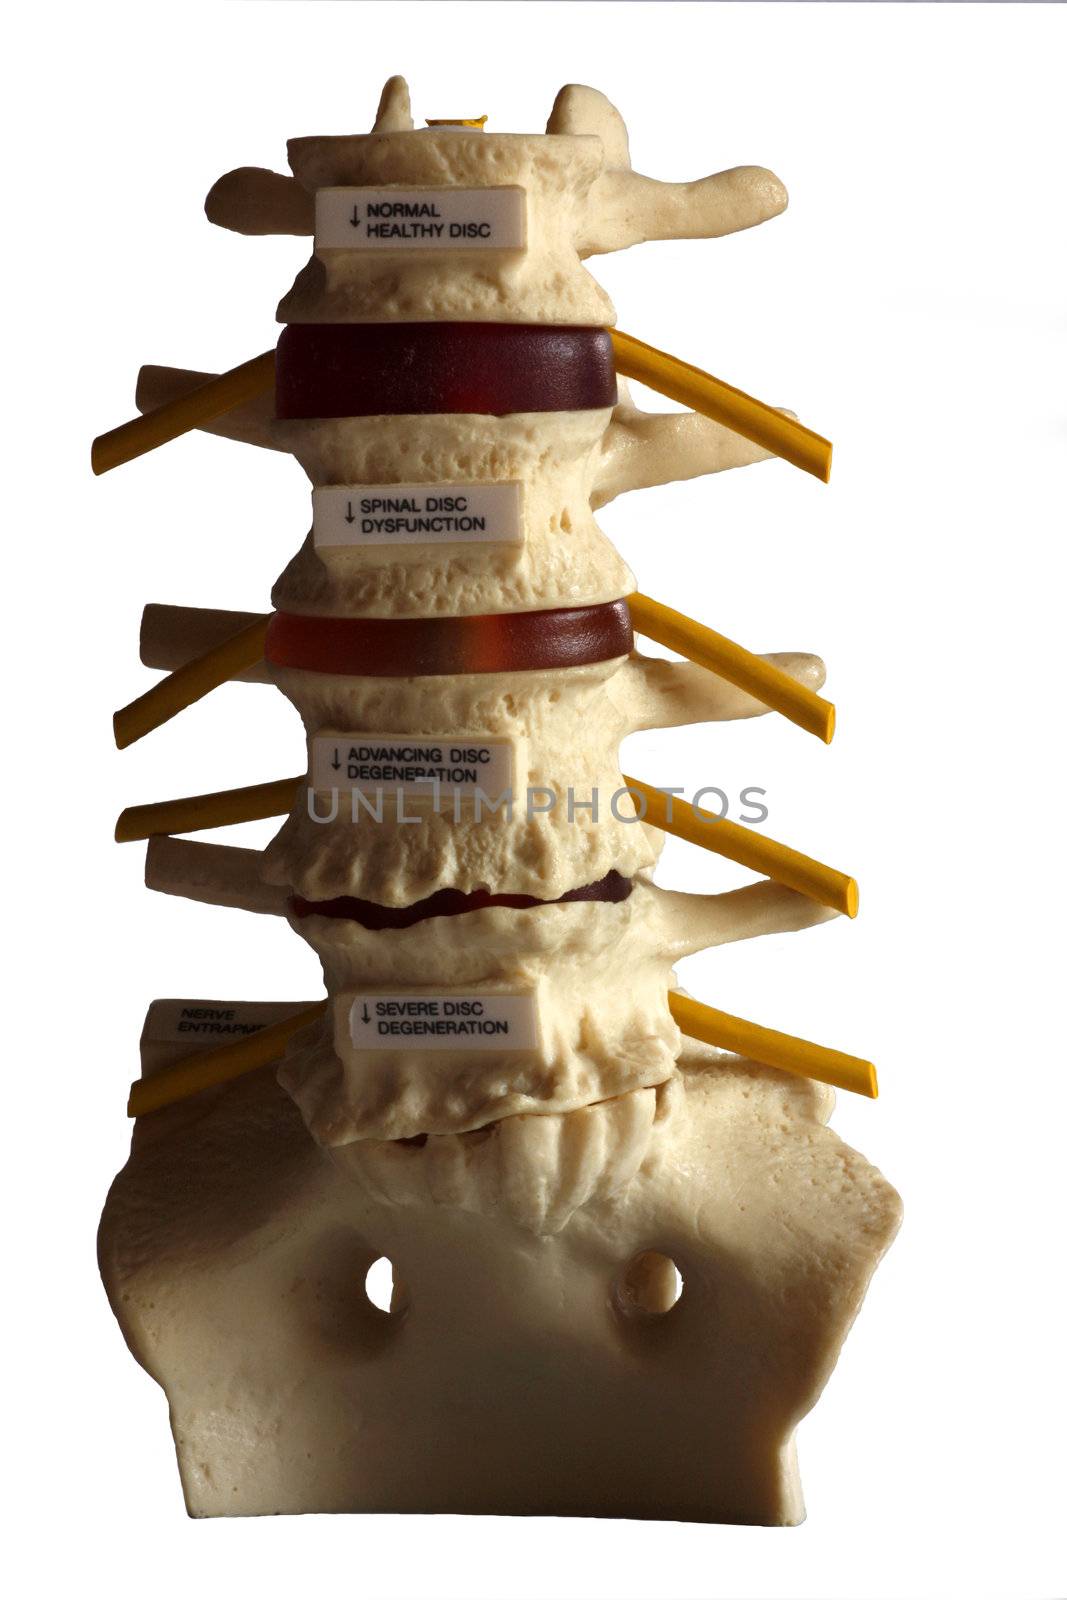 Part of the human spine model